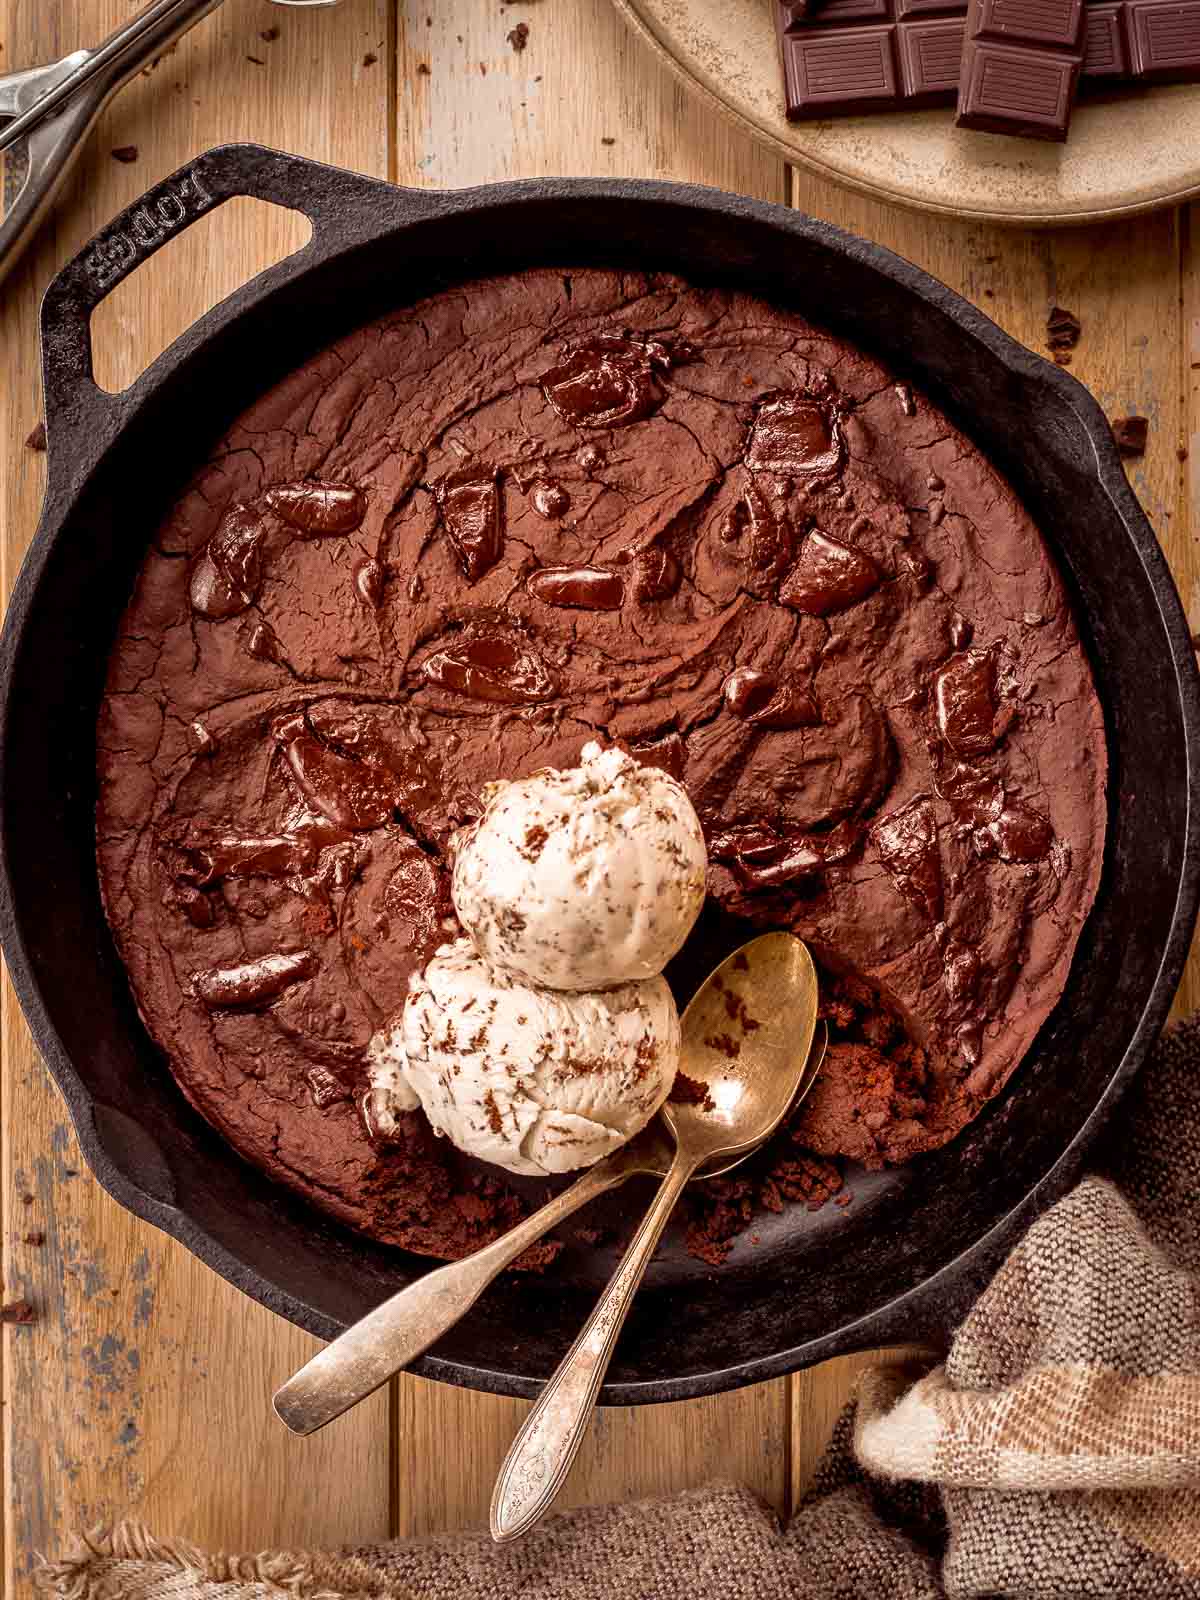 Brownie skillet with chocolate chips. Two scoops of ice cream are mixed into the skillet with two spoons.